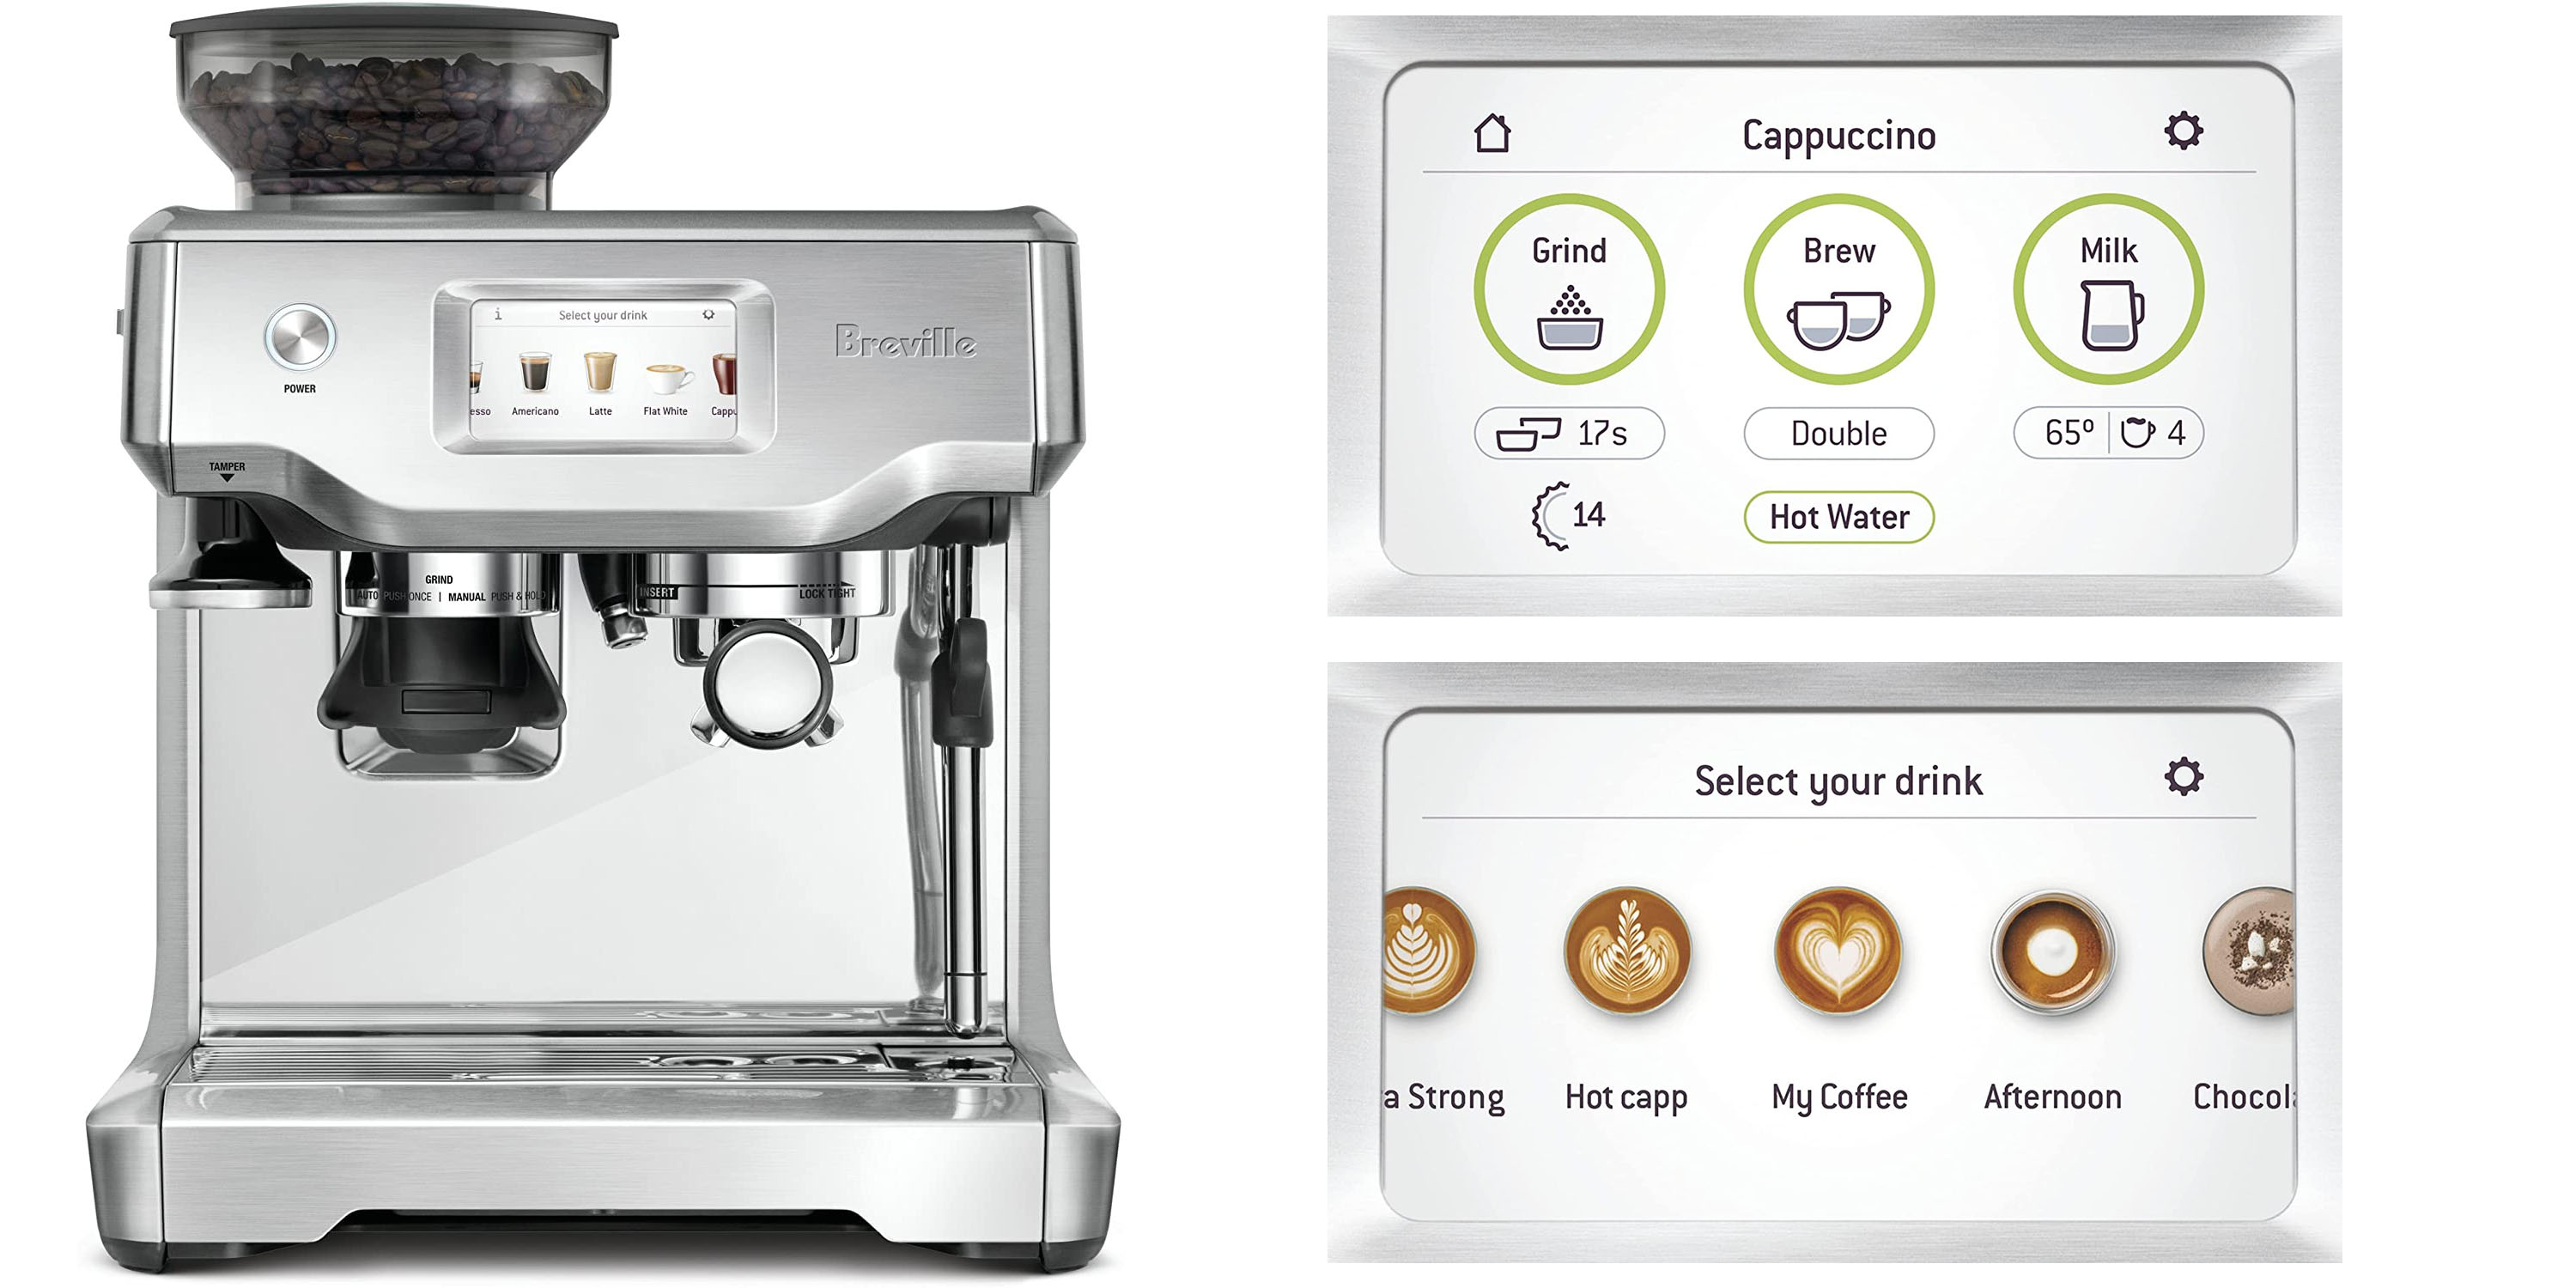 https://9to5mac.com/wp-content/uploads/sites/6/2021/11/Breville-Barista-Touch.jpg?quality=82&strip=all